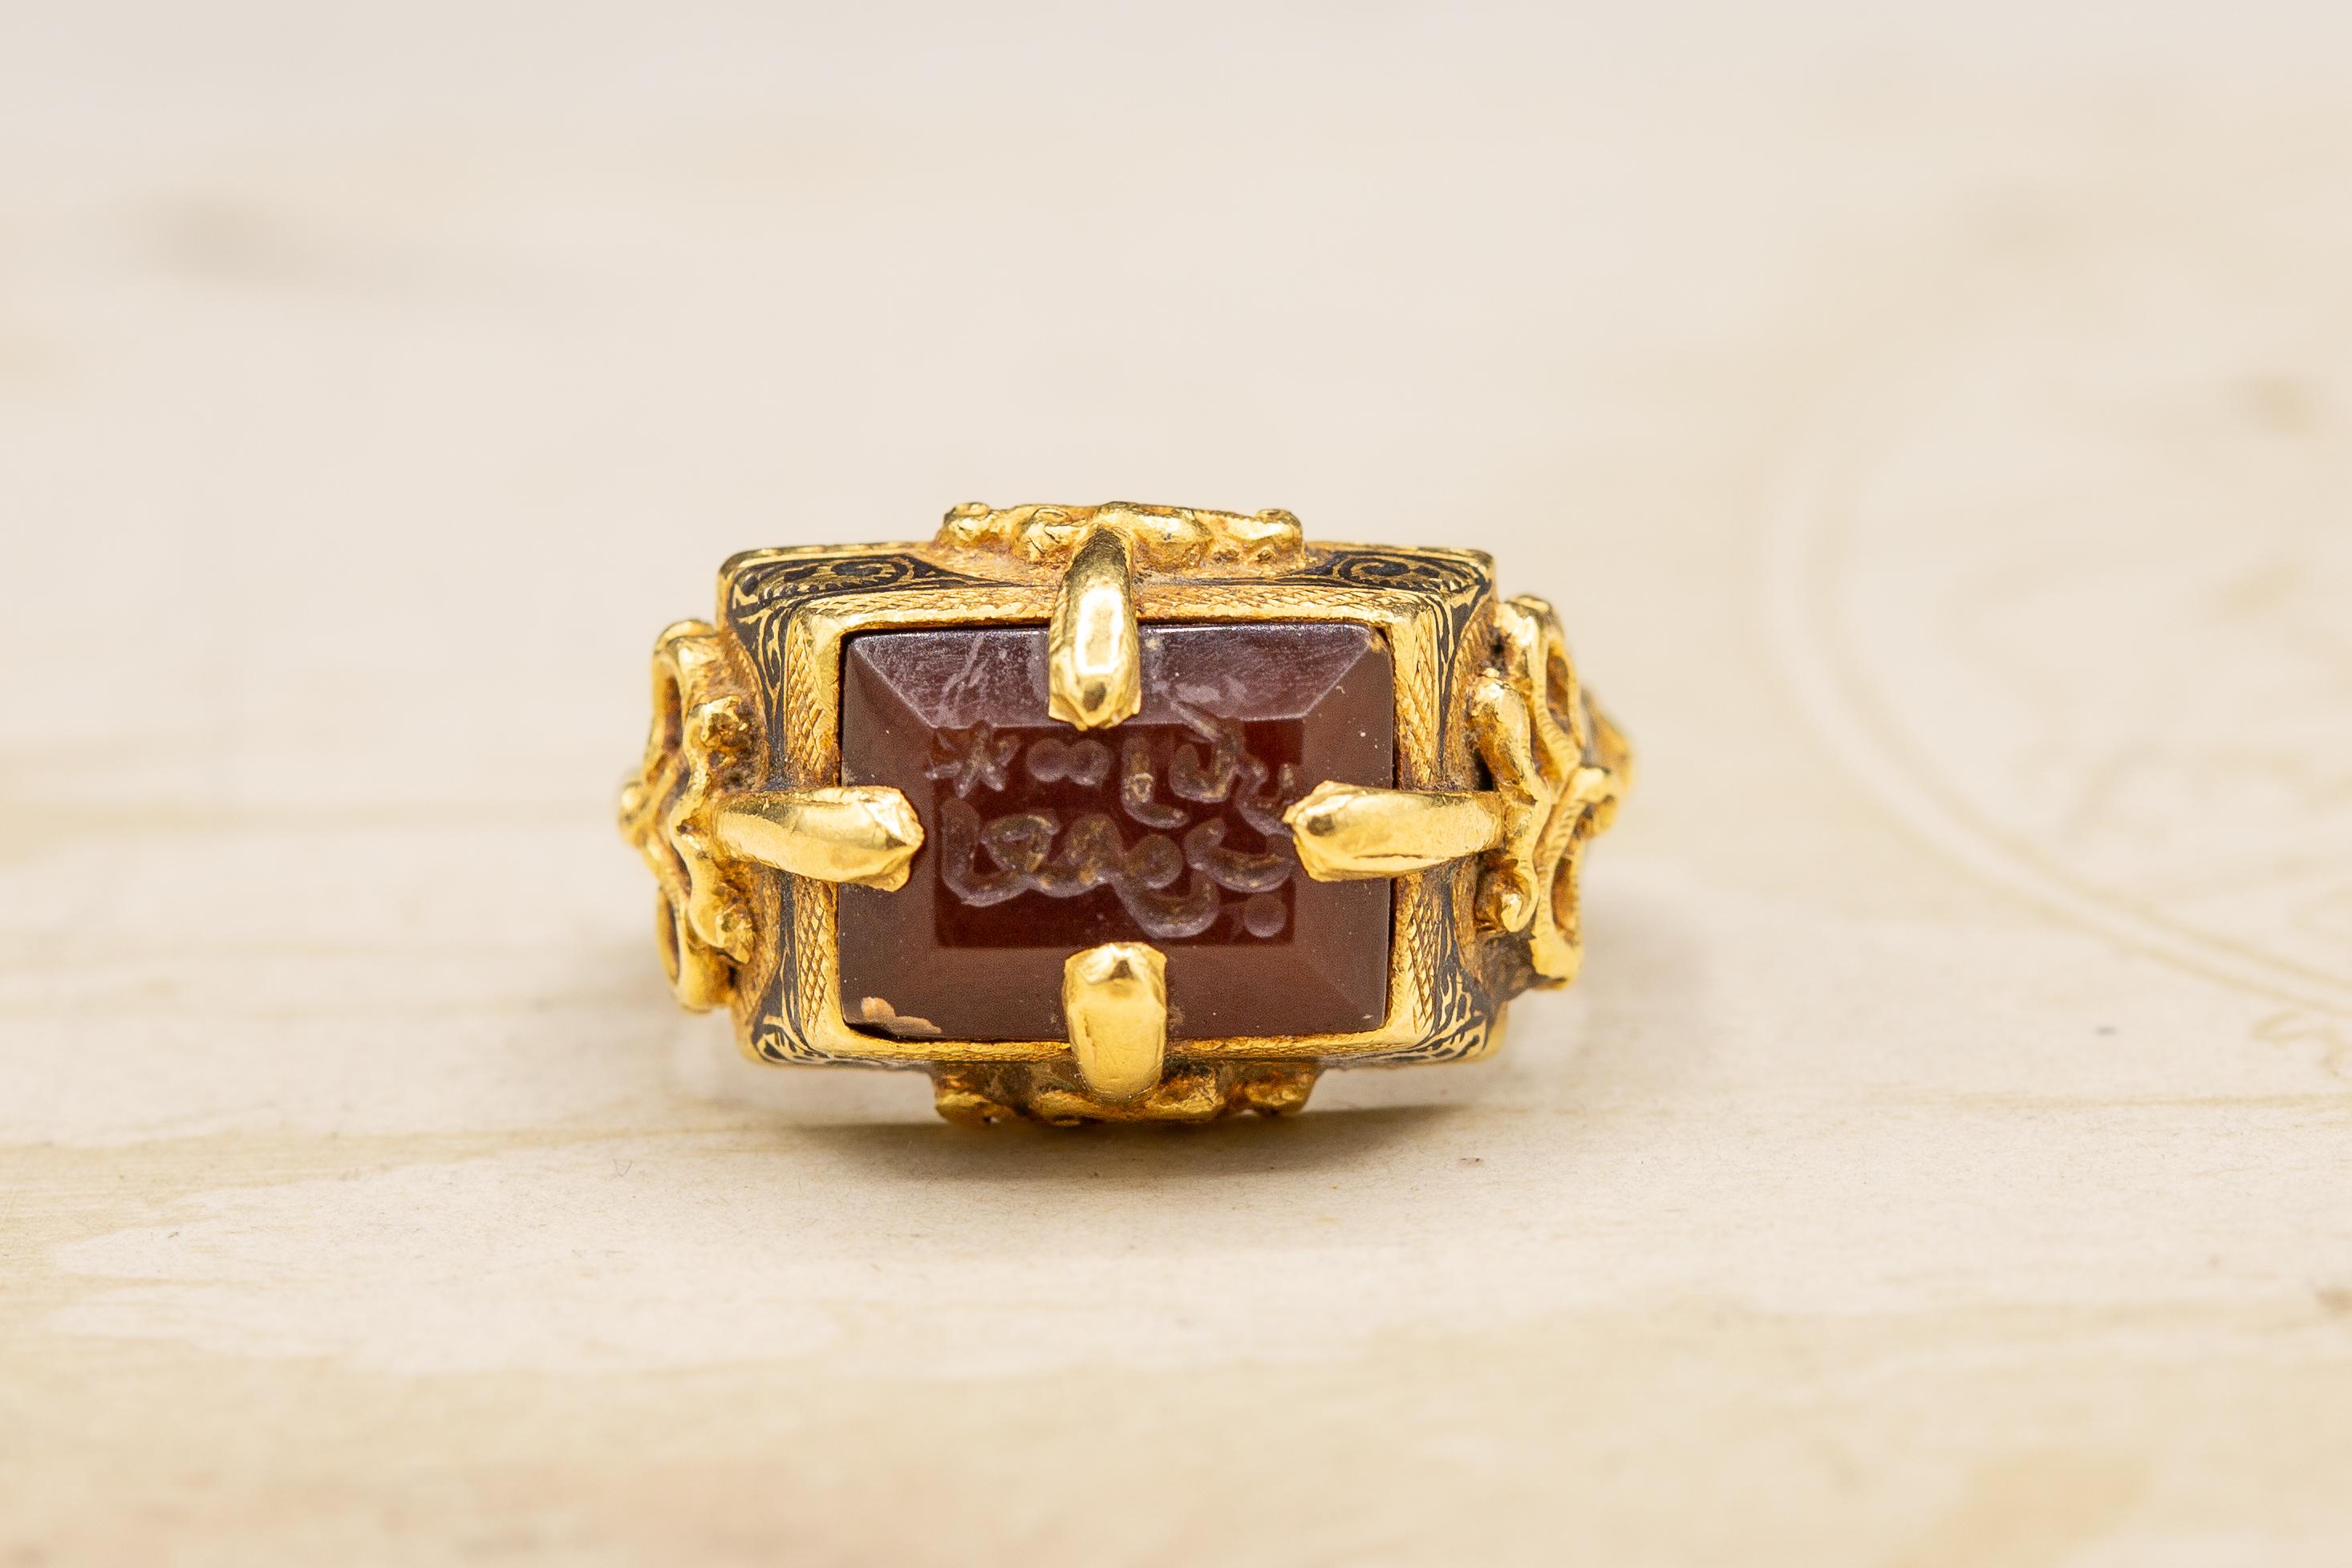 This incredible gold ring dates from the 12th century Seljuk dynasty. The carnelian intaglio is set within a typical Seljuk tapered rectangular bezel with a four-pronged gold setting soldered to the outside of the bezel. Applied and pierced